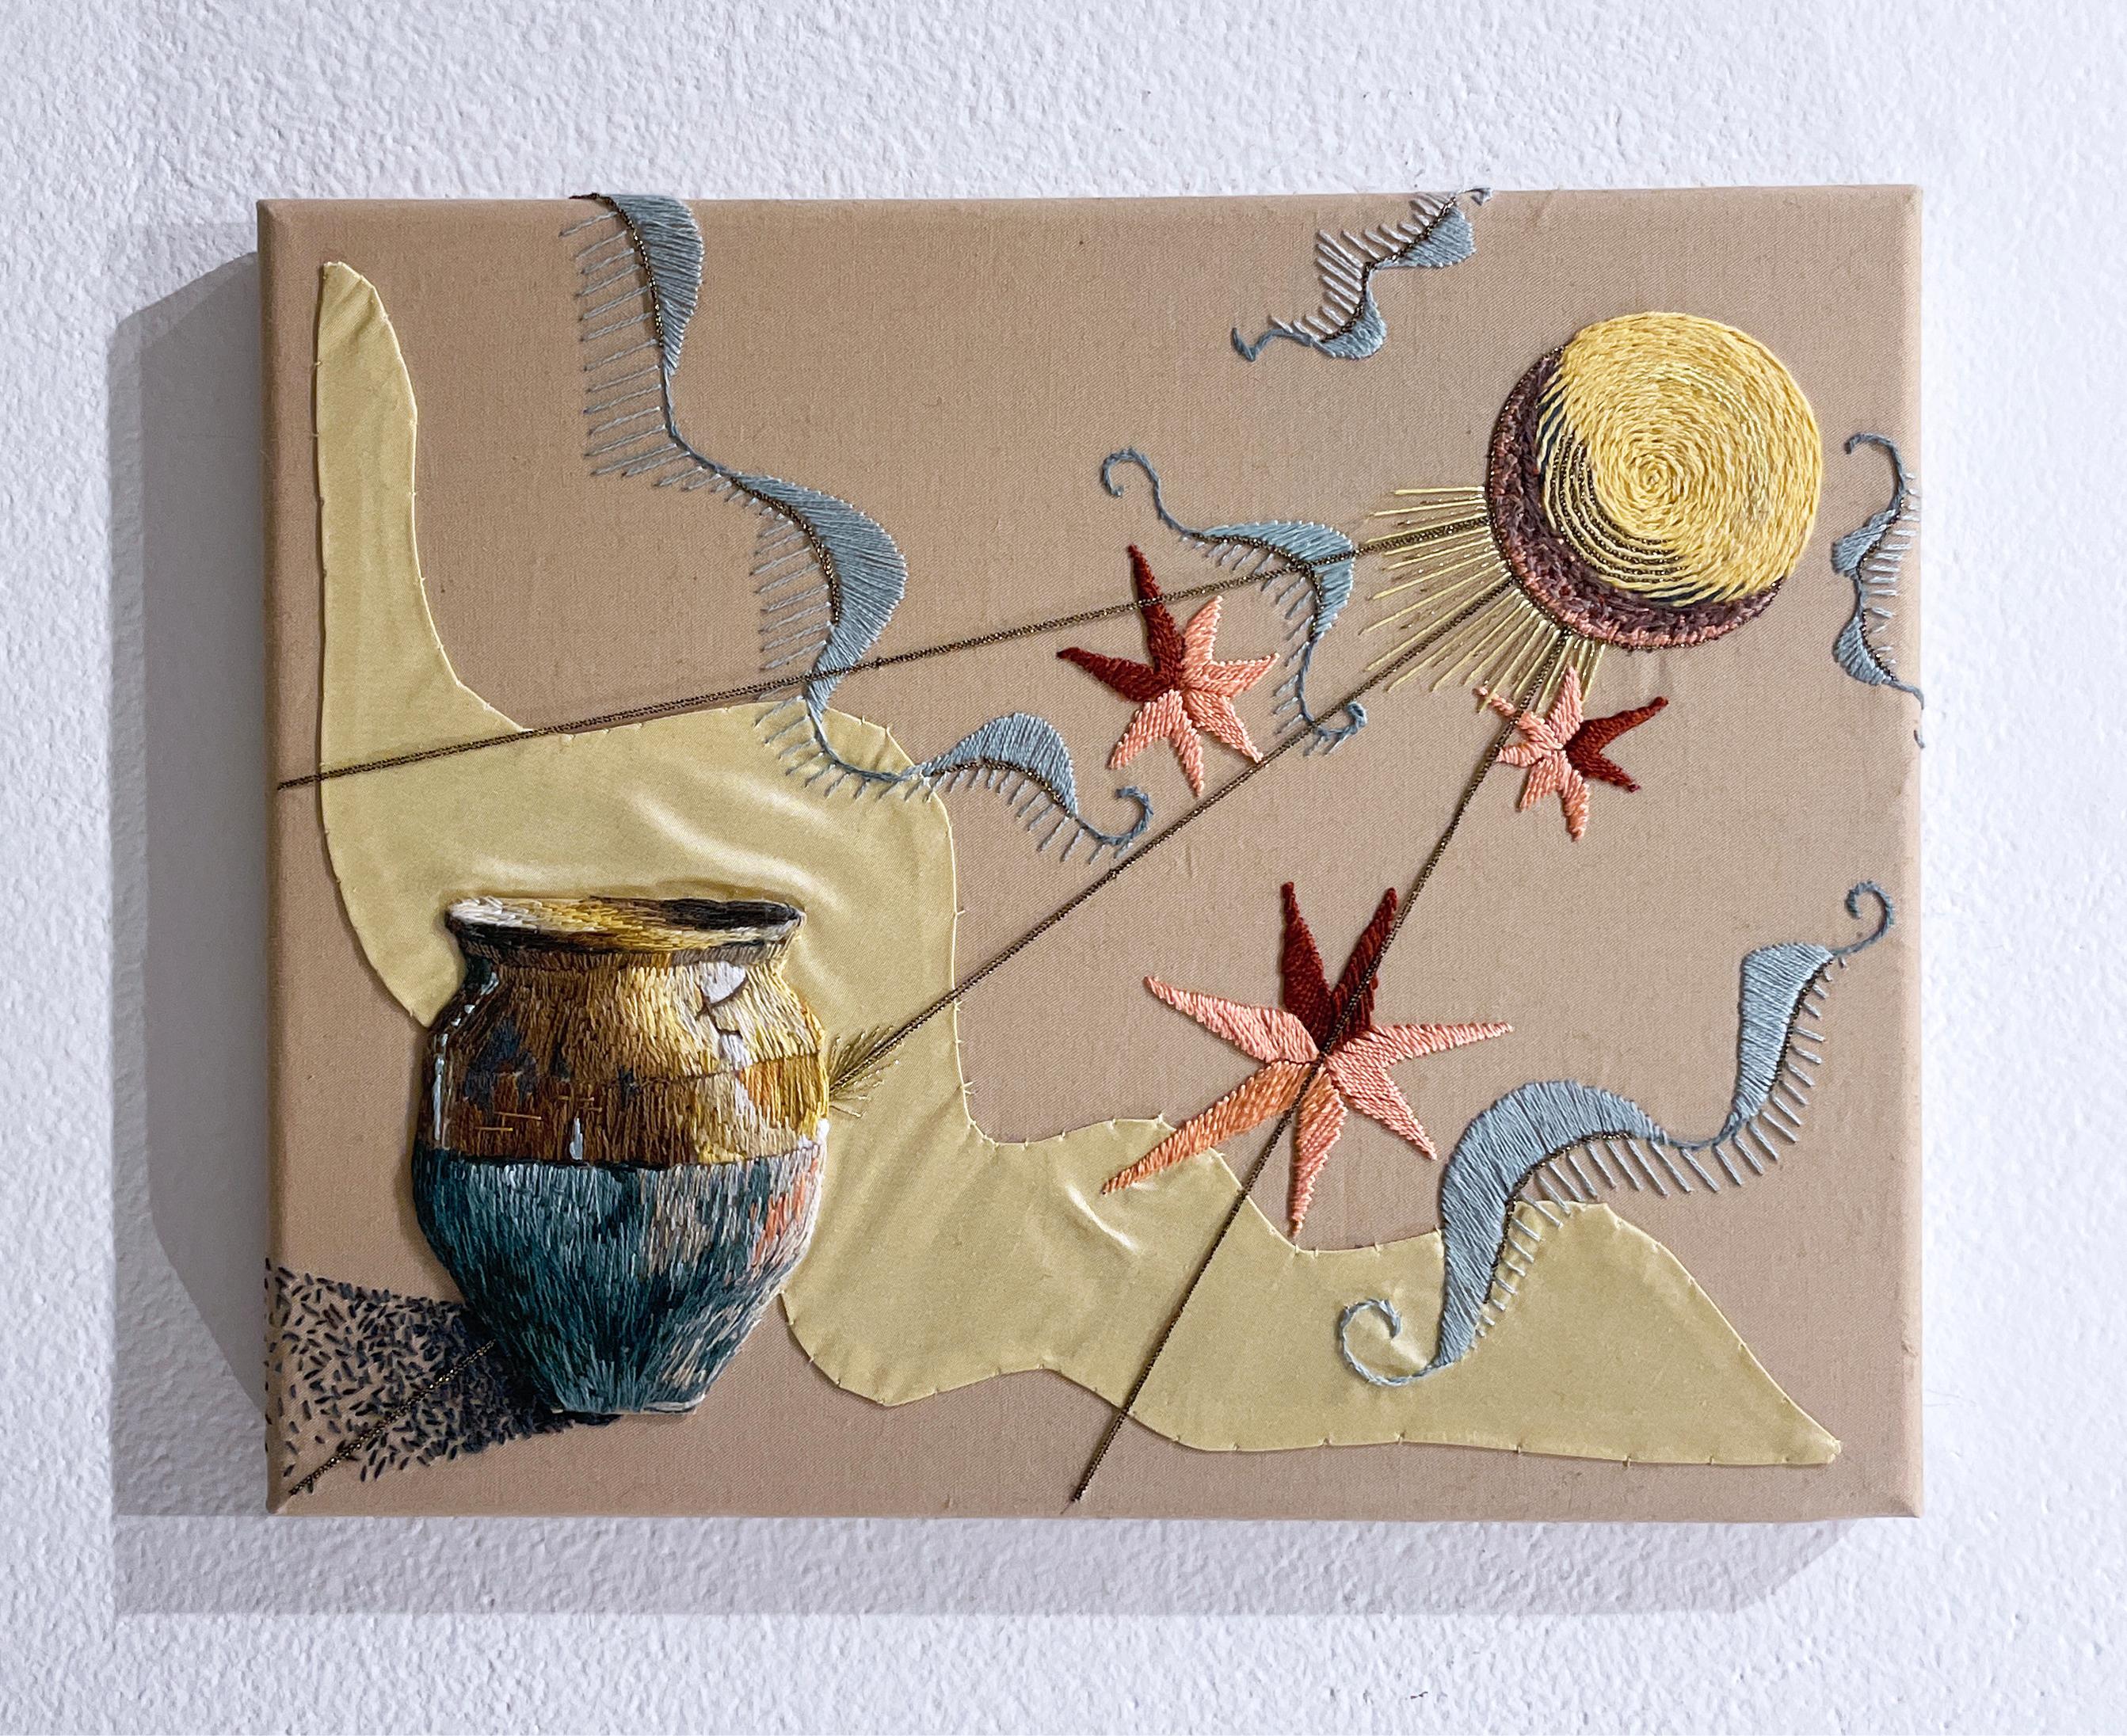 Cosmic Urn (2022) embroidery, interiors, textile, fiber, earth tones, peach - Painting by Amelia Dennigan